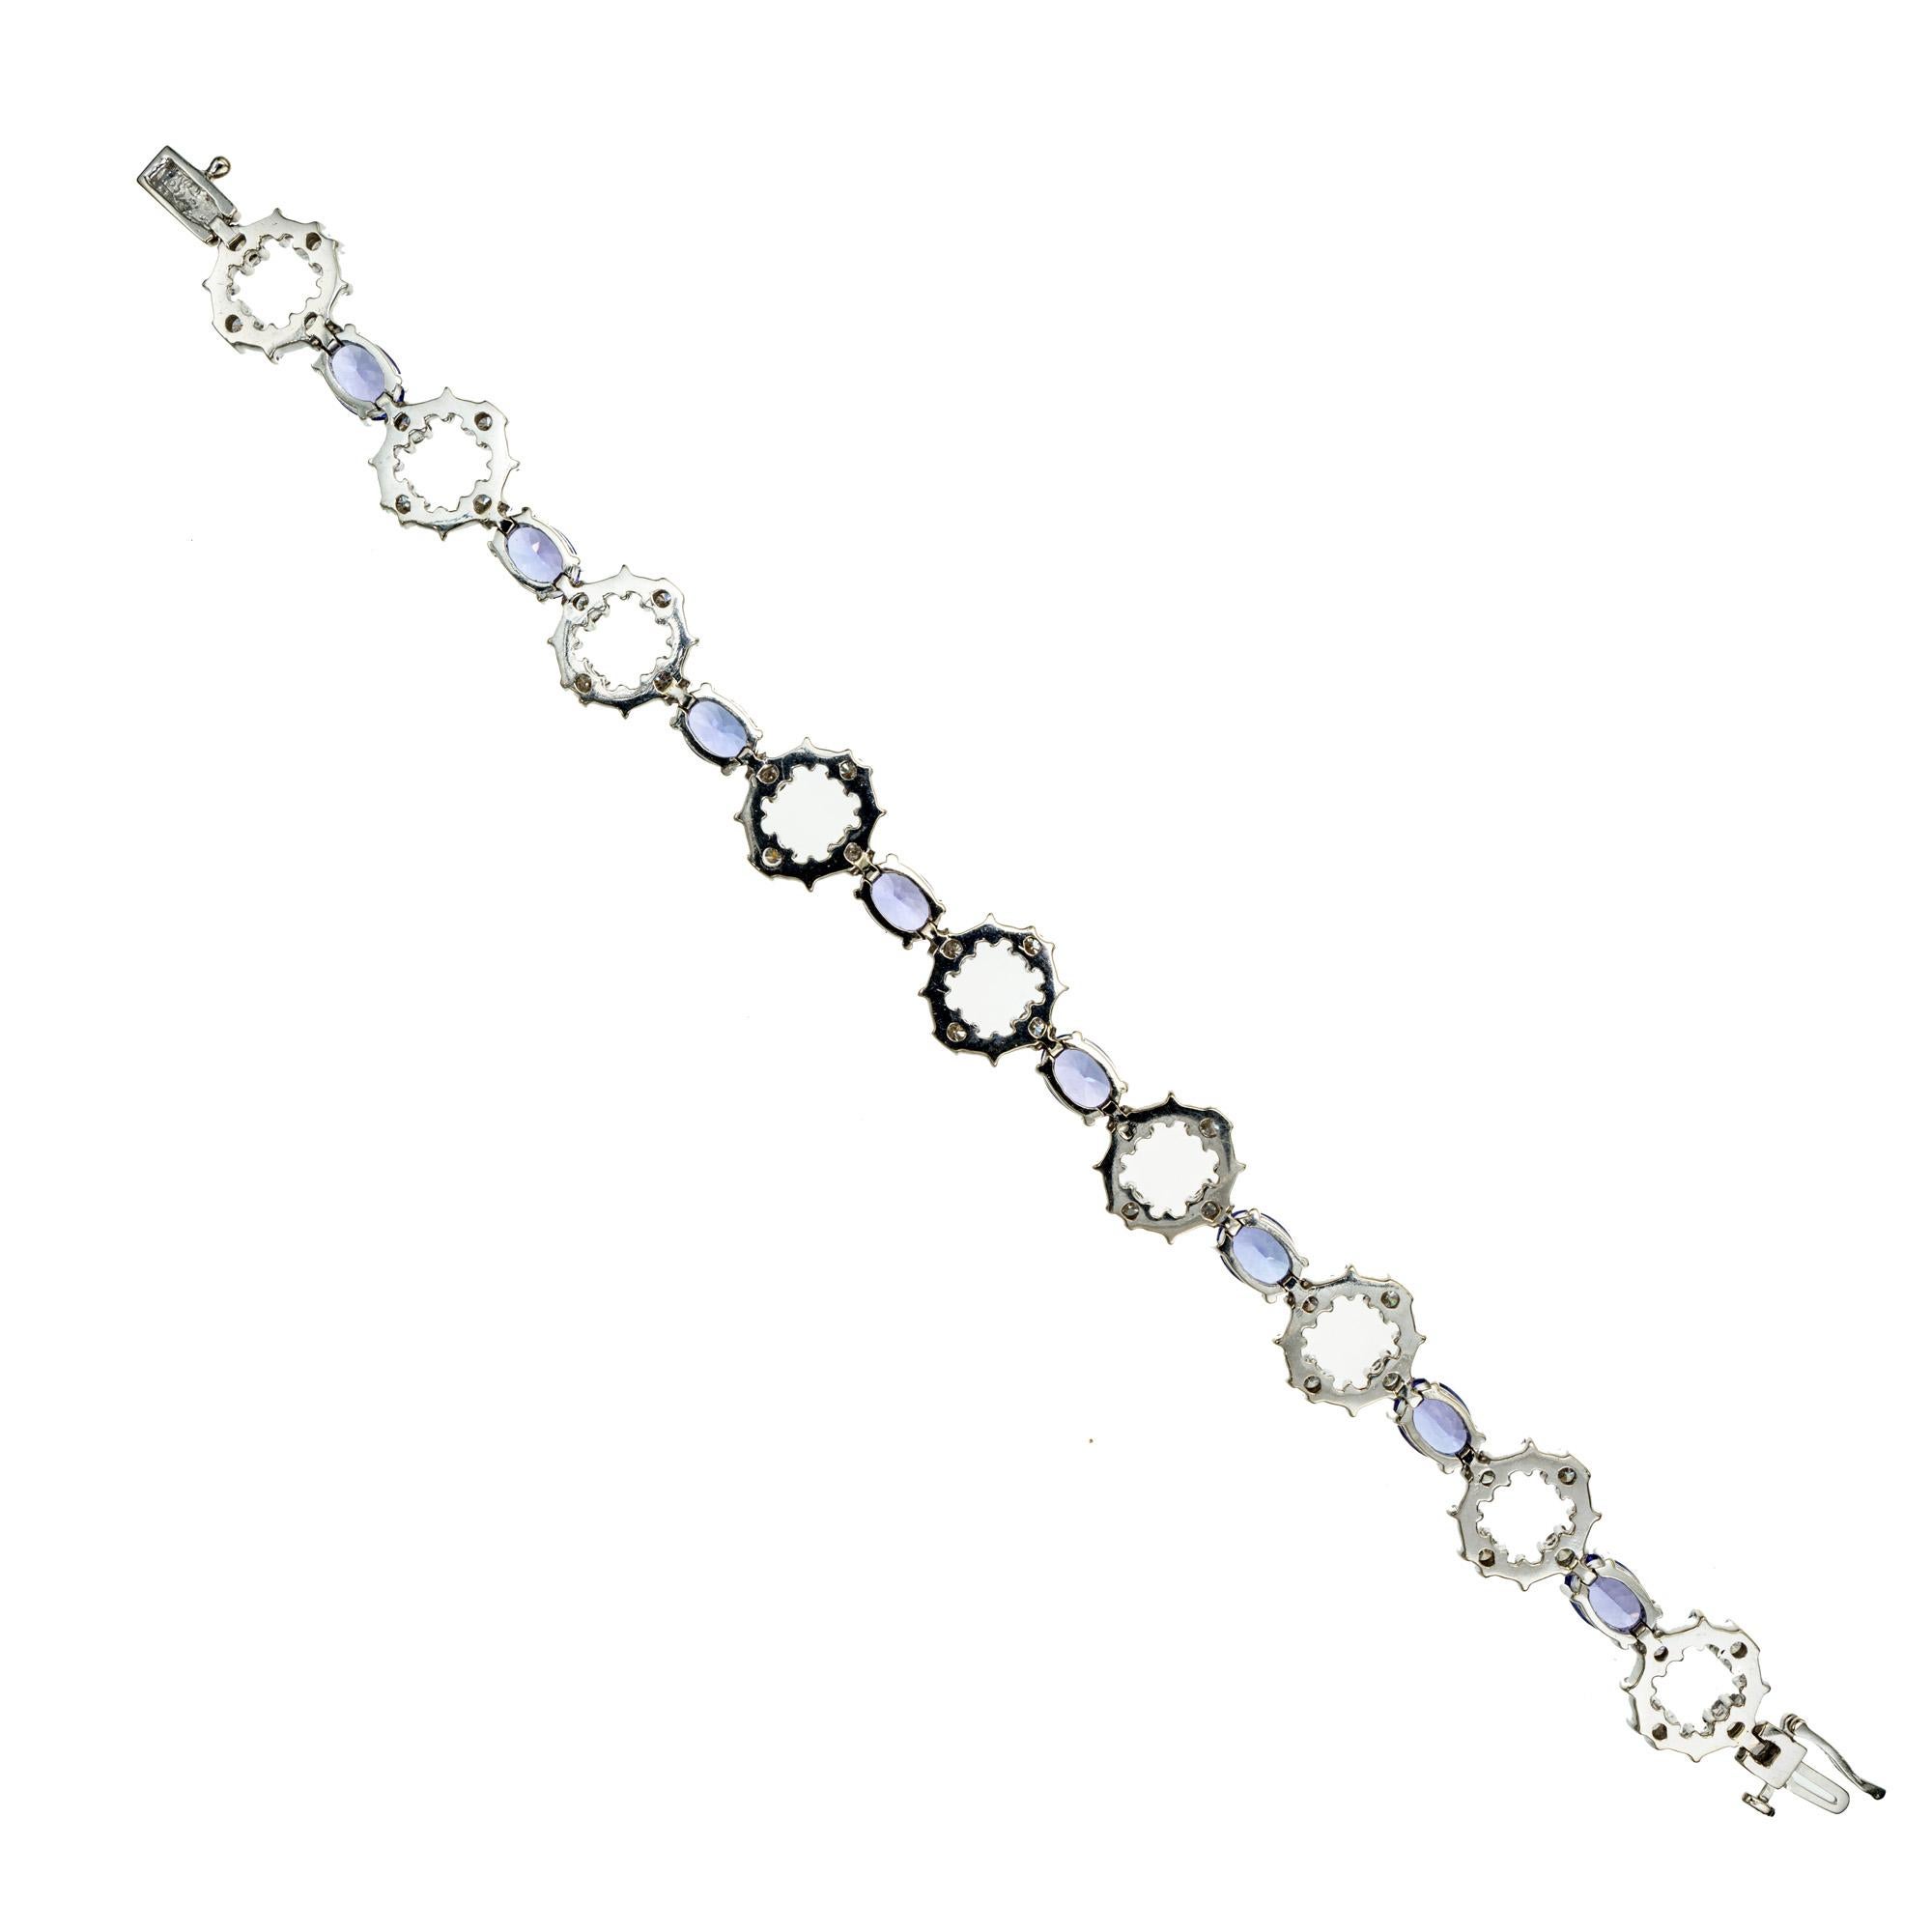 Le Vian fine tanzanite and diamond 14k white gold bracelet. 8 oval tanzanite's separated by rings of round cut diamonds. 7.5 inches in length. 

8 oval purplish blue tanzanite's, approx. 14.00cts
36 round diamonds, J-K SI approx. 2.50cts
14k white